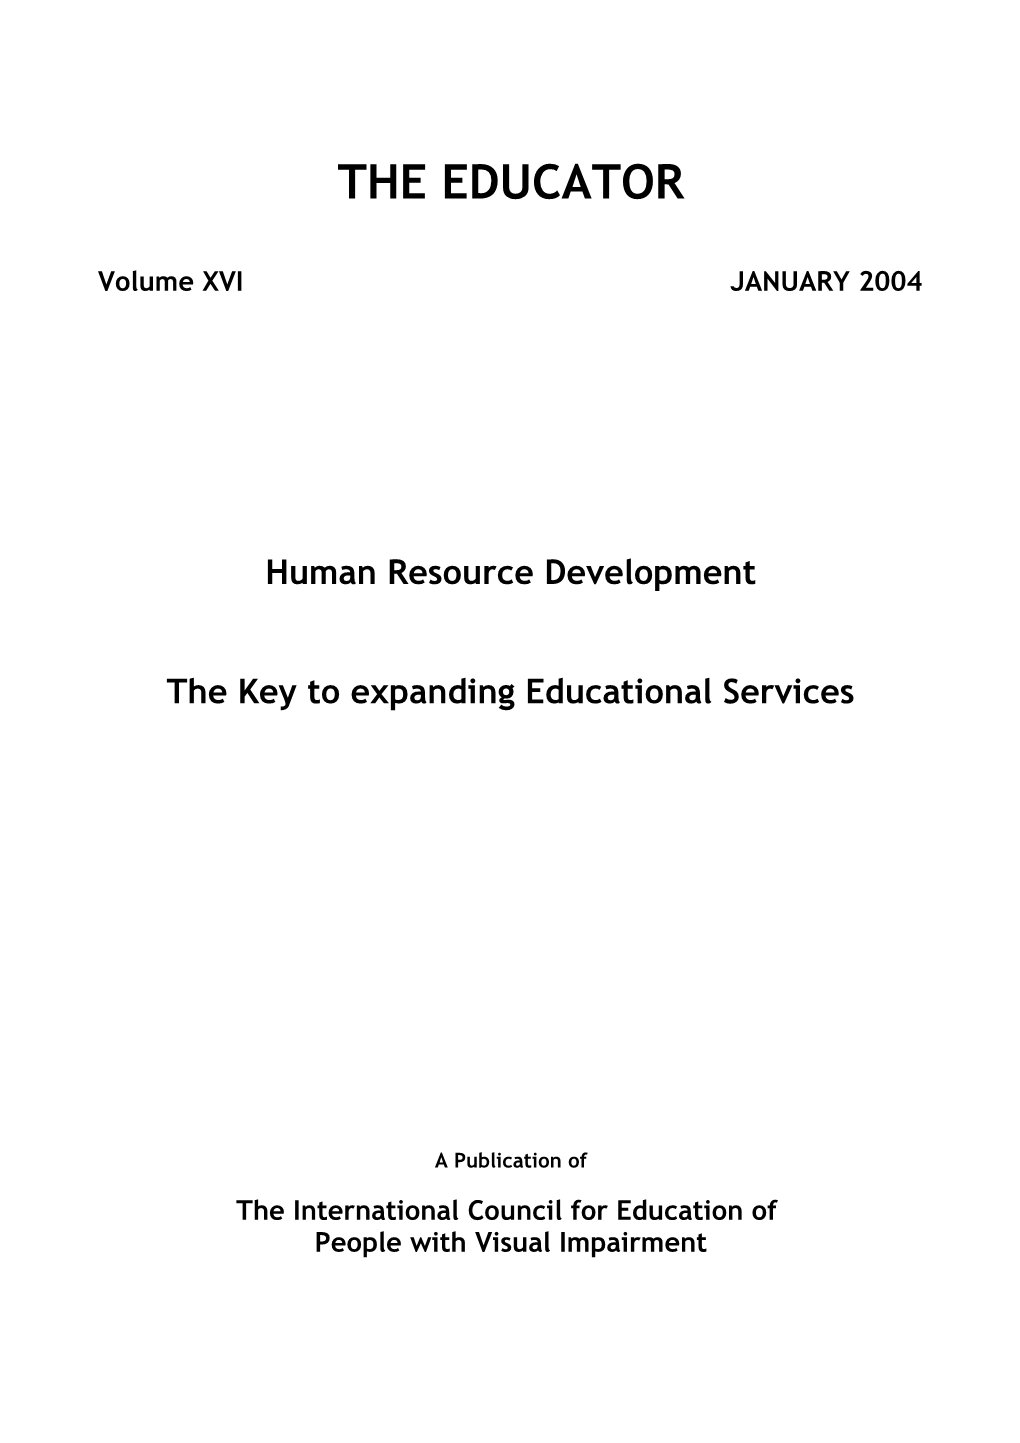 The Key to Expanding Educational Services